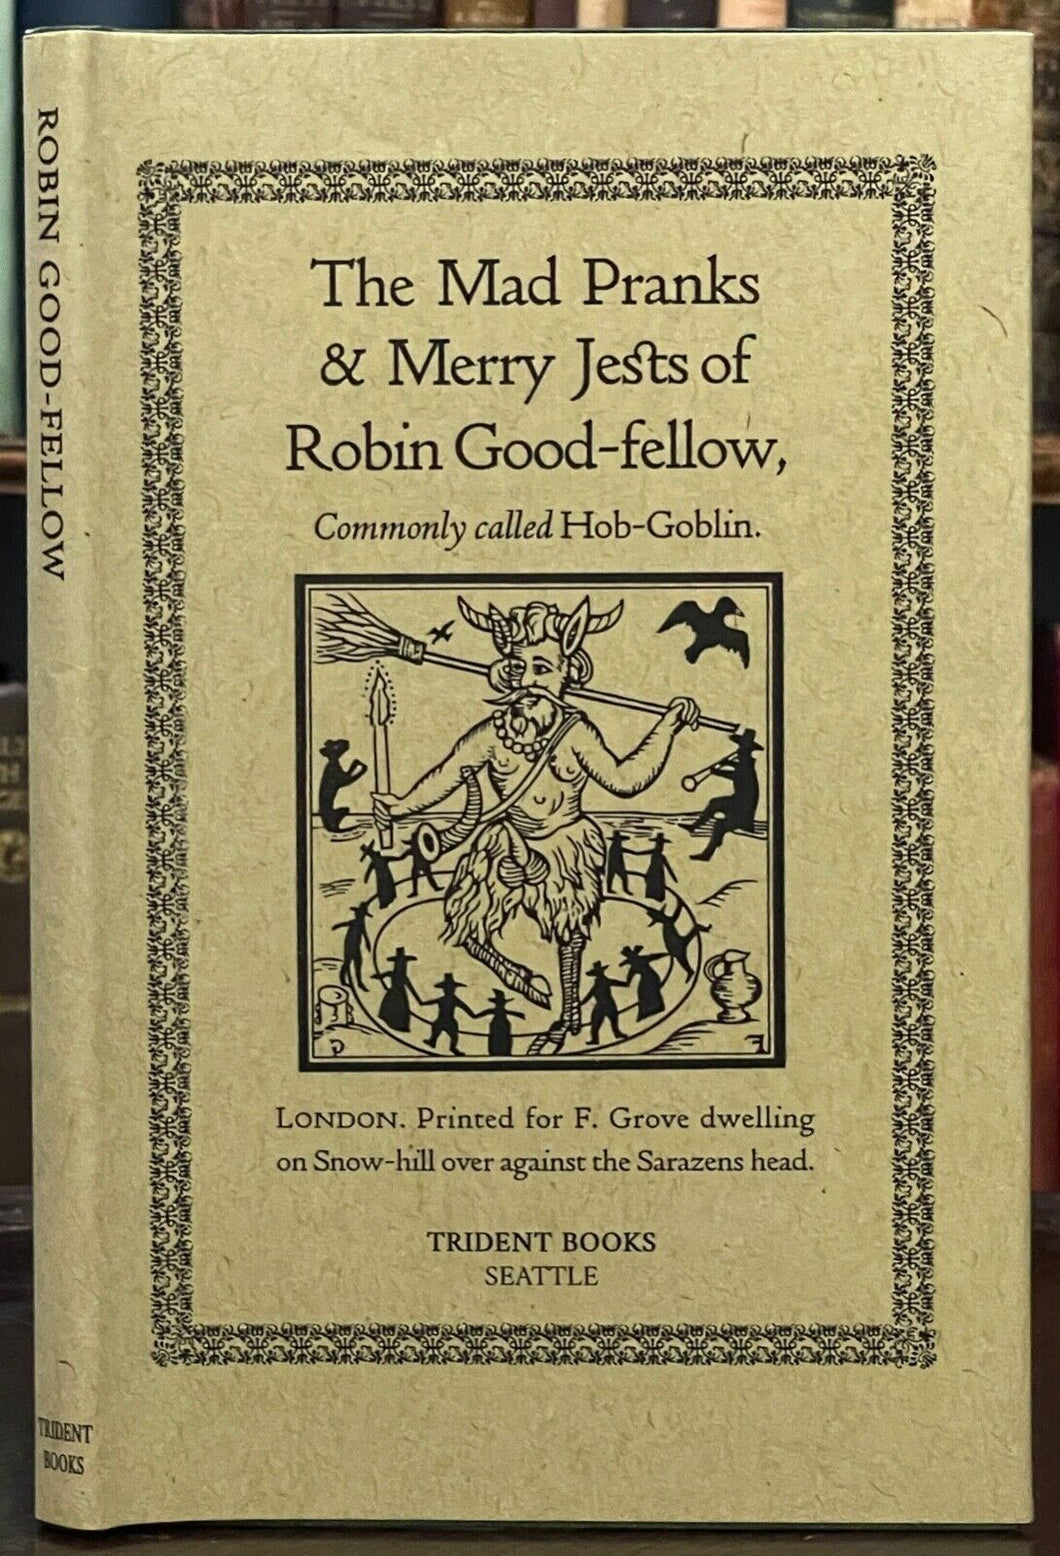 MAD PRANKS & MERRY JESTS OF ROBIN GOODFELLOW - 2004 - LEGENDS FOLKLORE PUCK